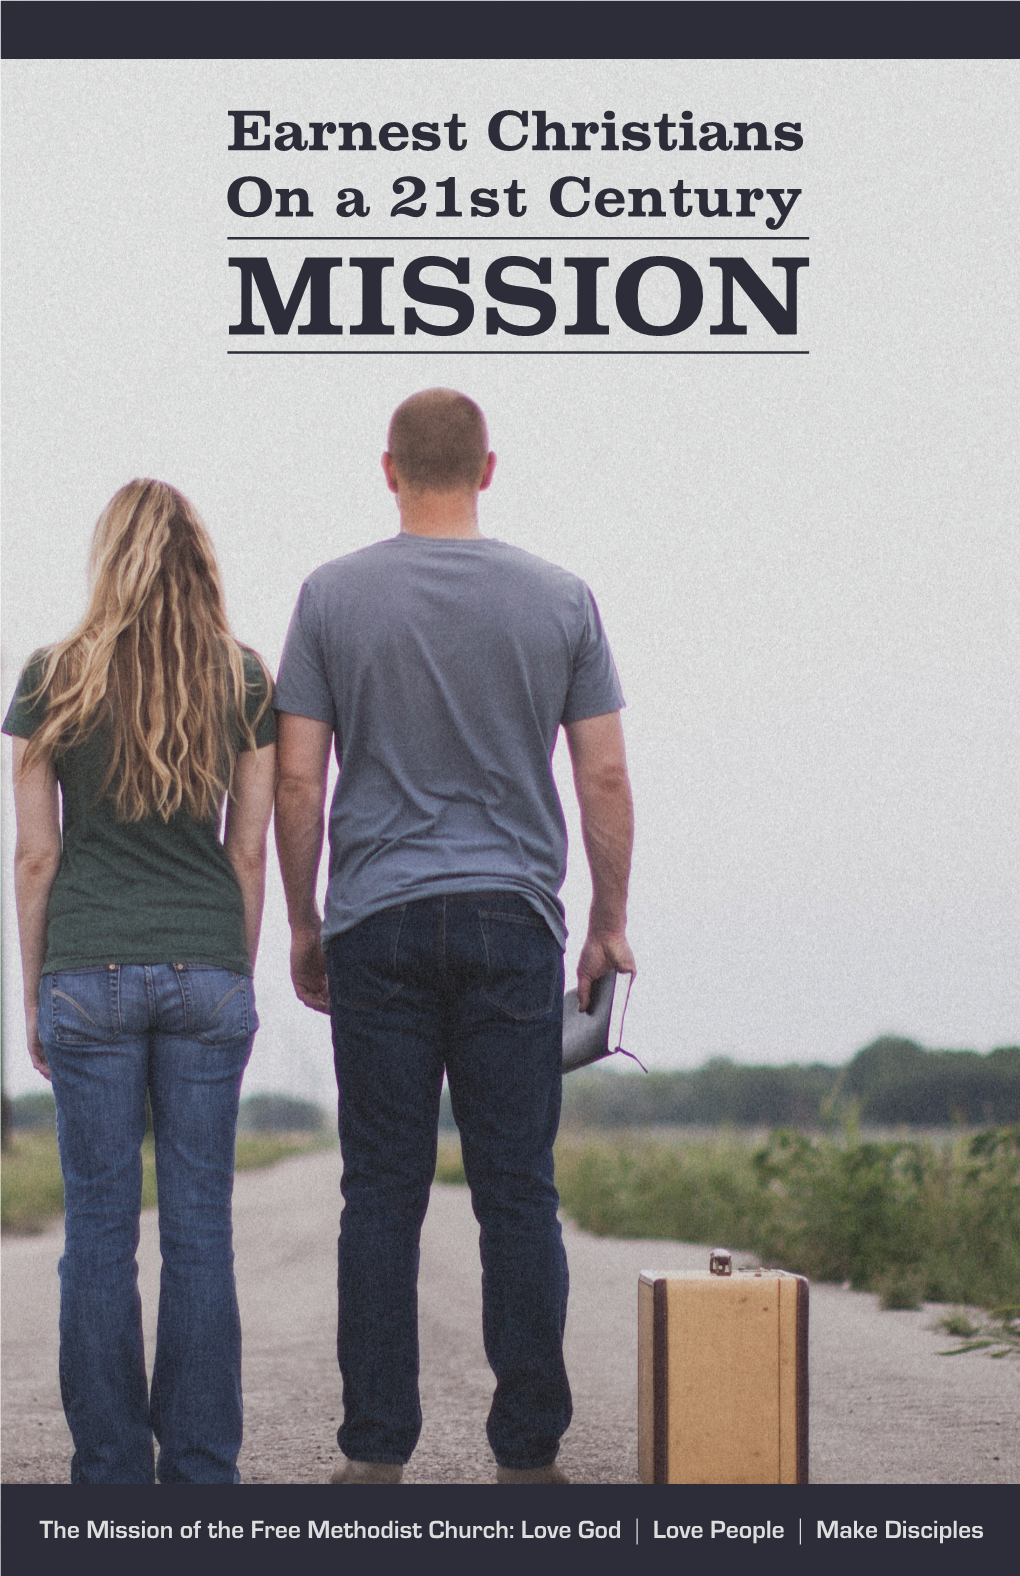 The Mission of the Free Methodist Church: Love God | Love People | Make Disciples